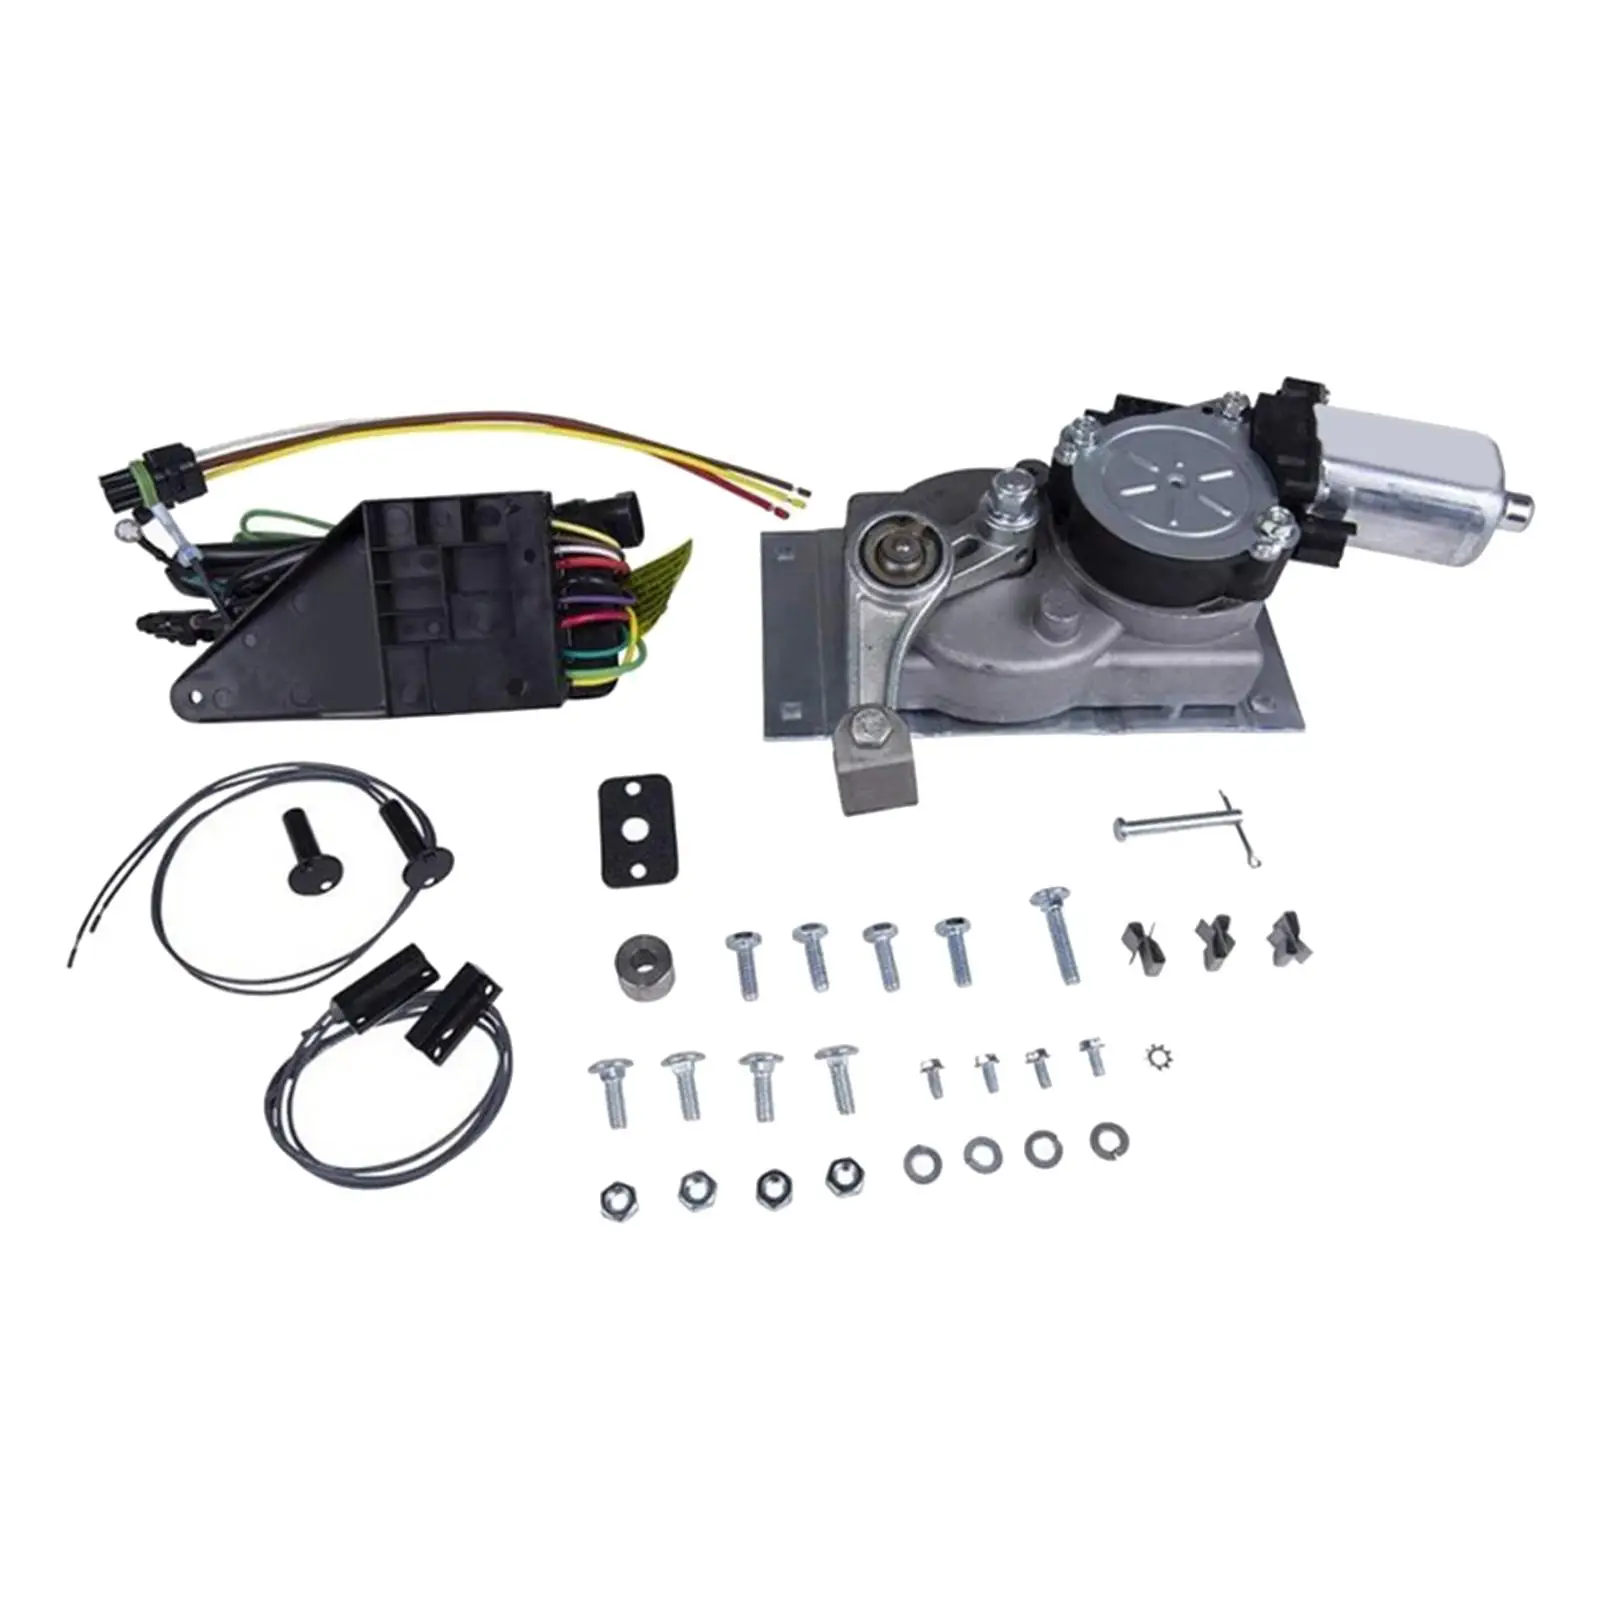 RV Step Motor Replacement High Efficiency Electric RV Step Motor Gearbox Kit for Truck B Linkage Motorhomes Easily Install